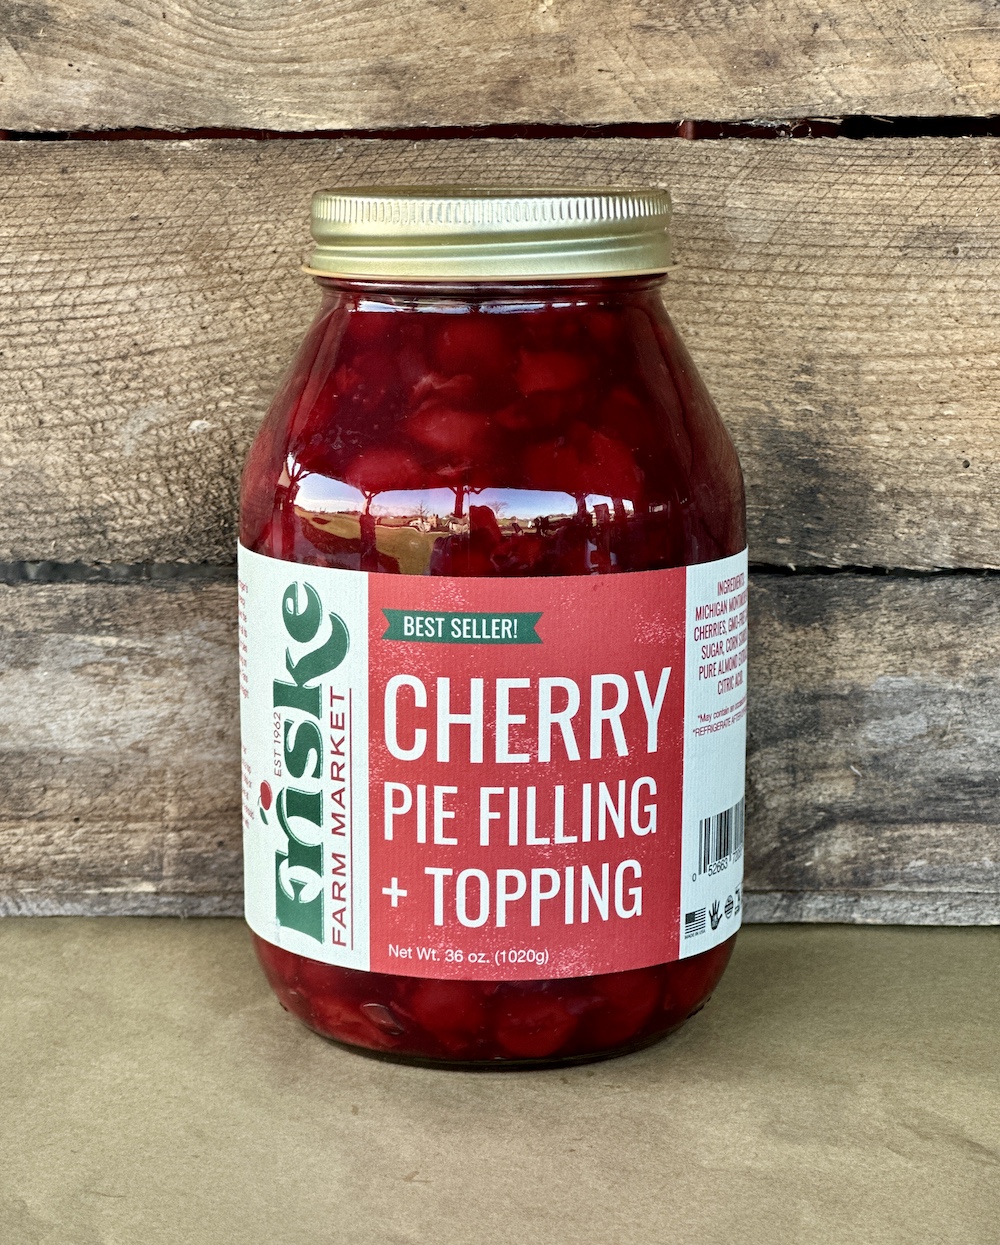 Perfect cherry pie filling for pies, pastries, and desserts